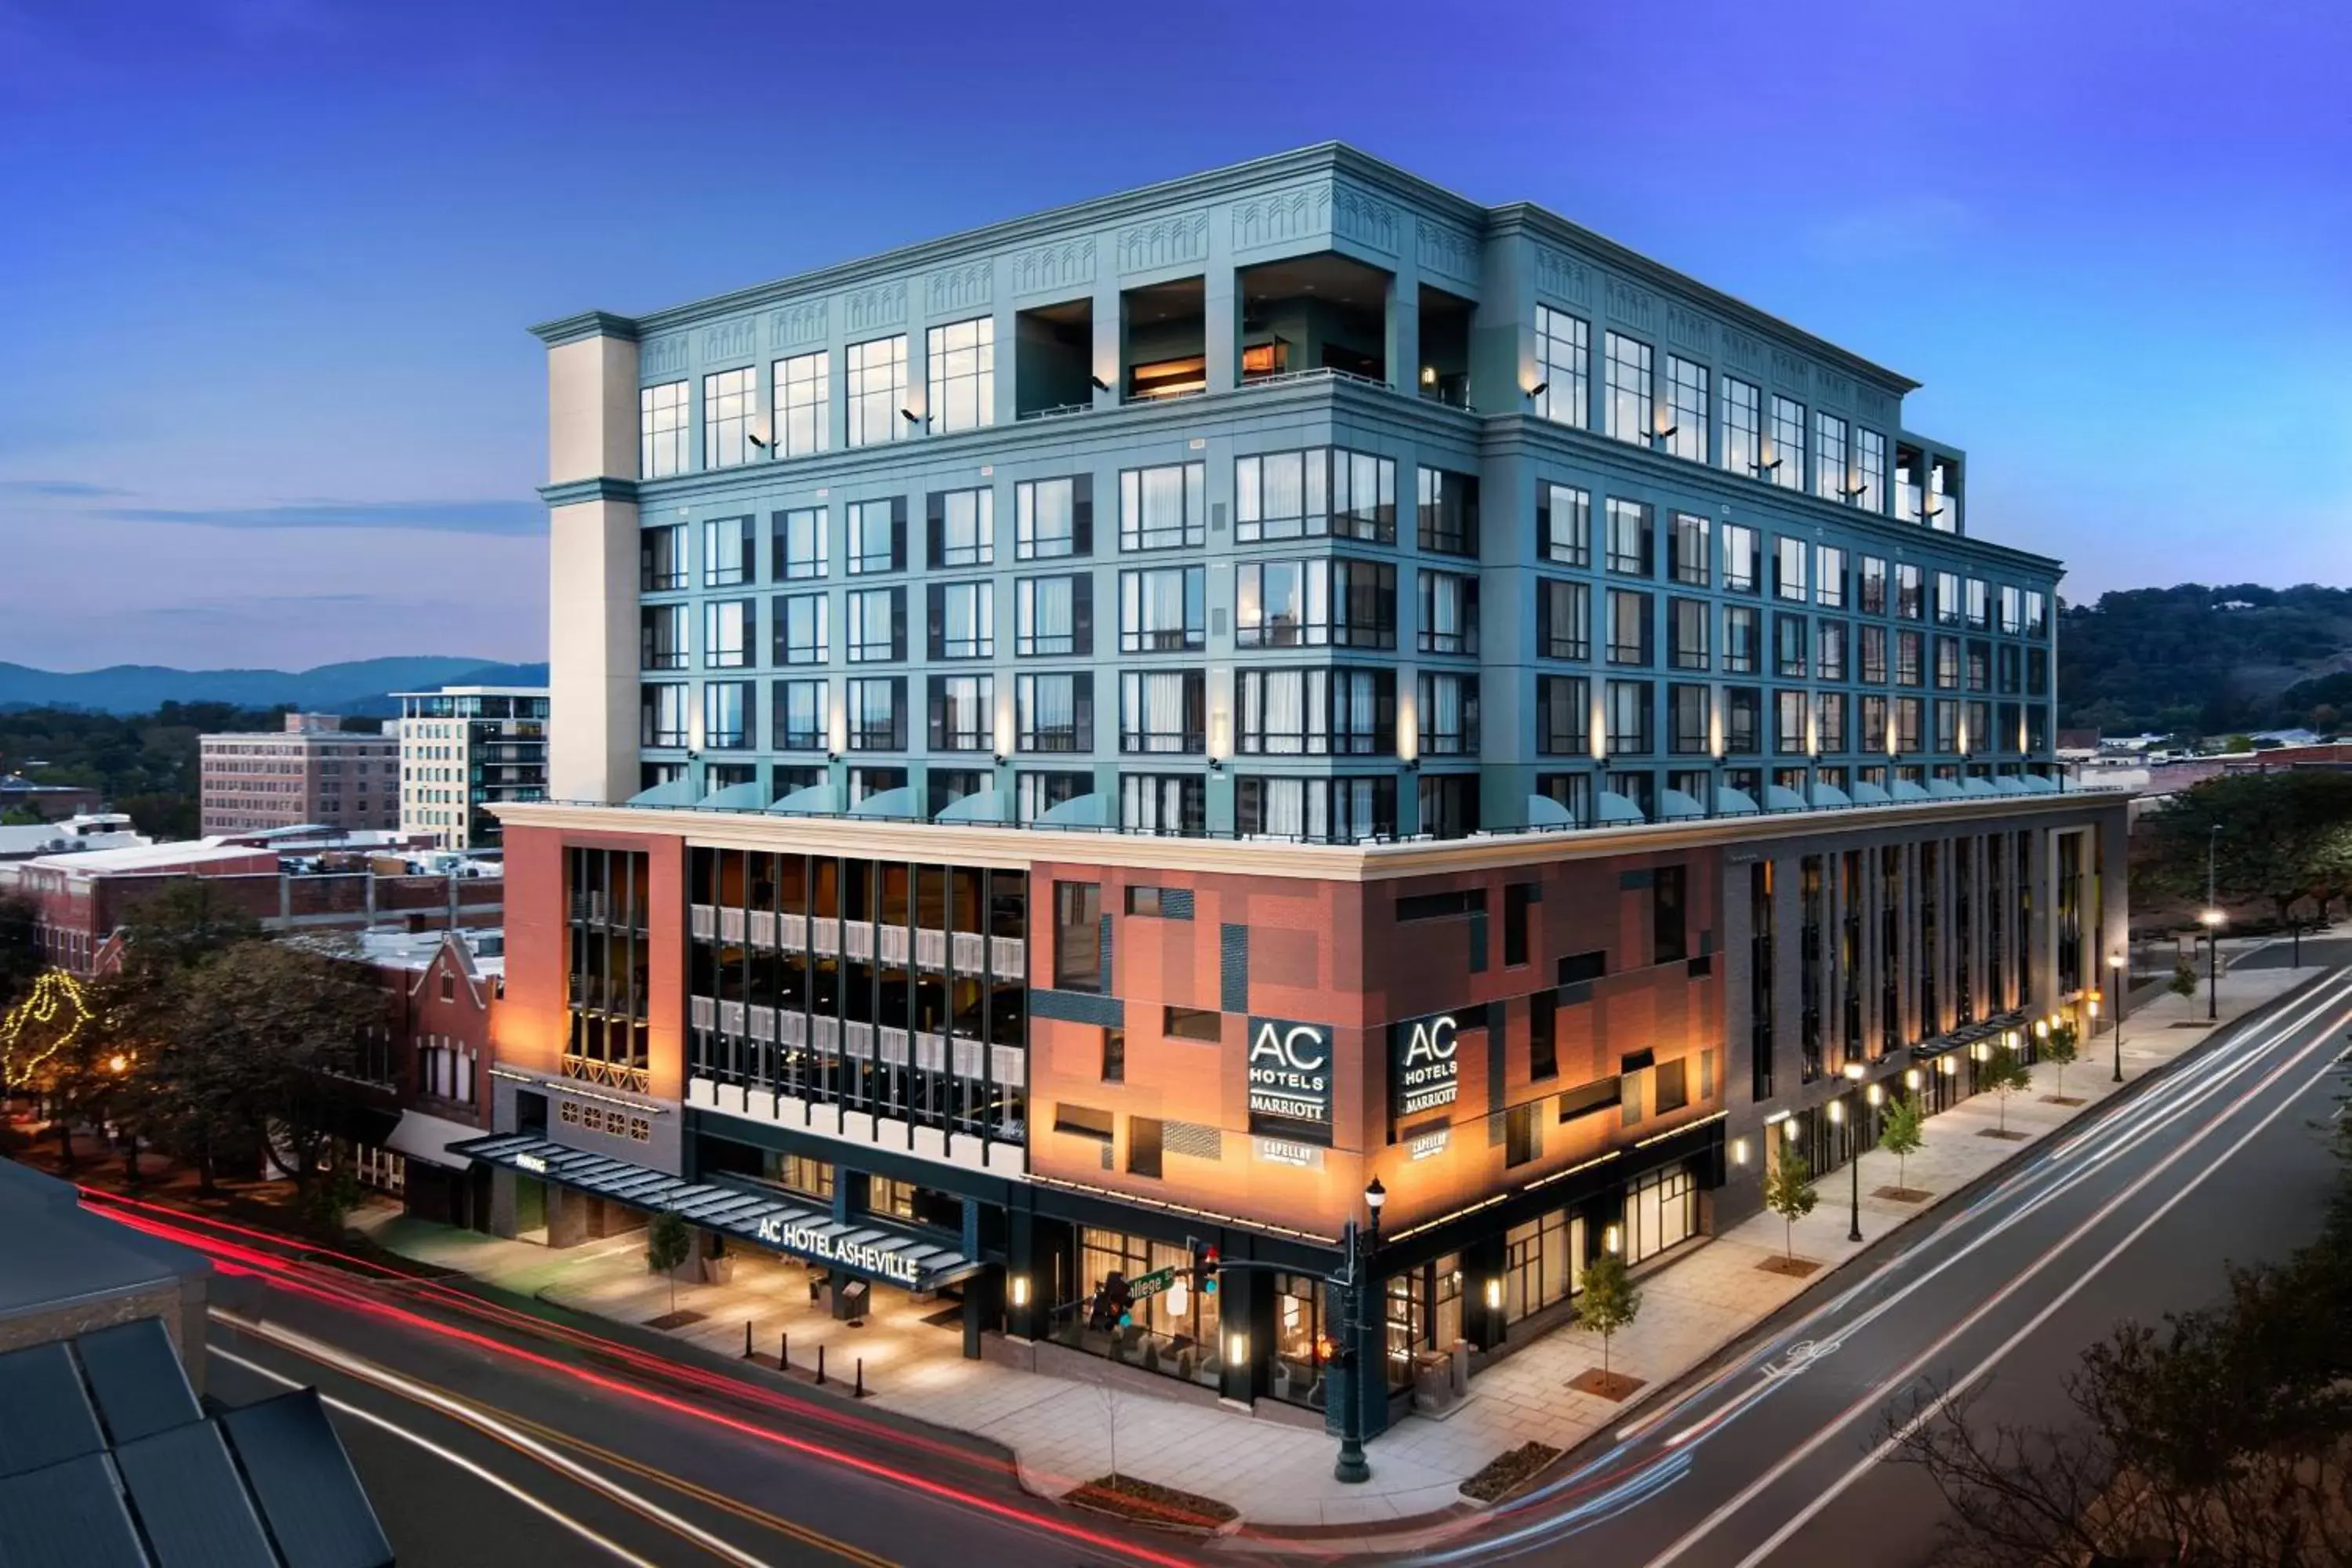 Property Building in AC Hotel Asheville Downtown